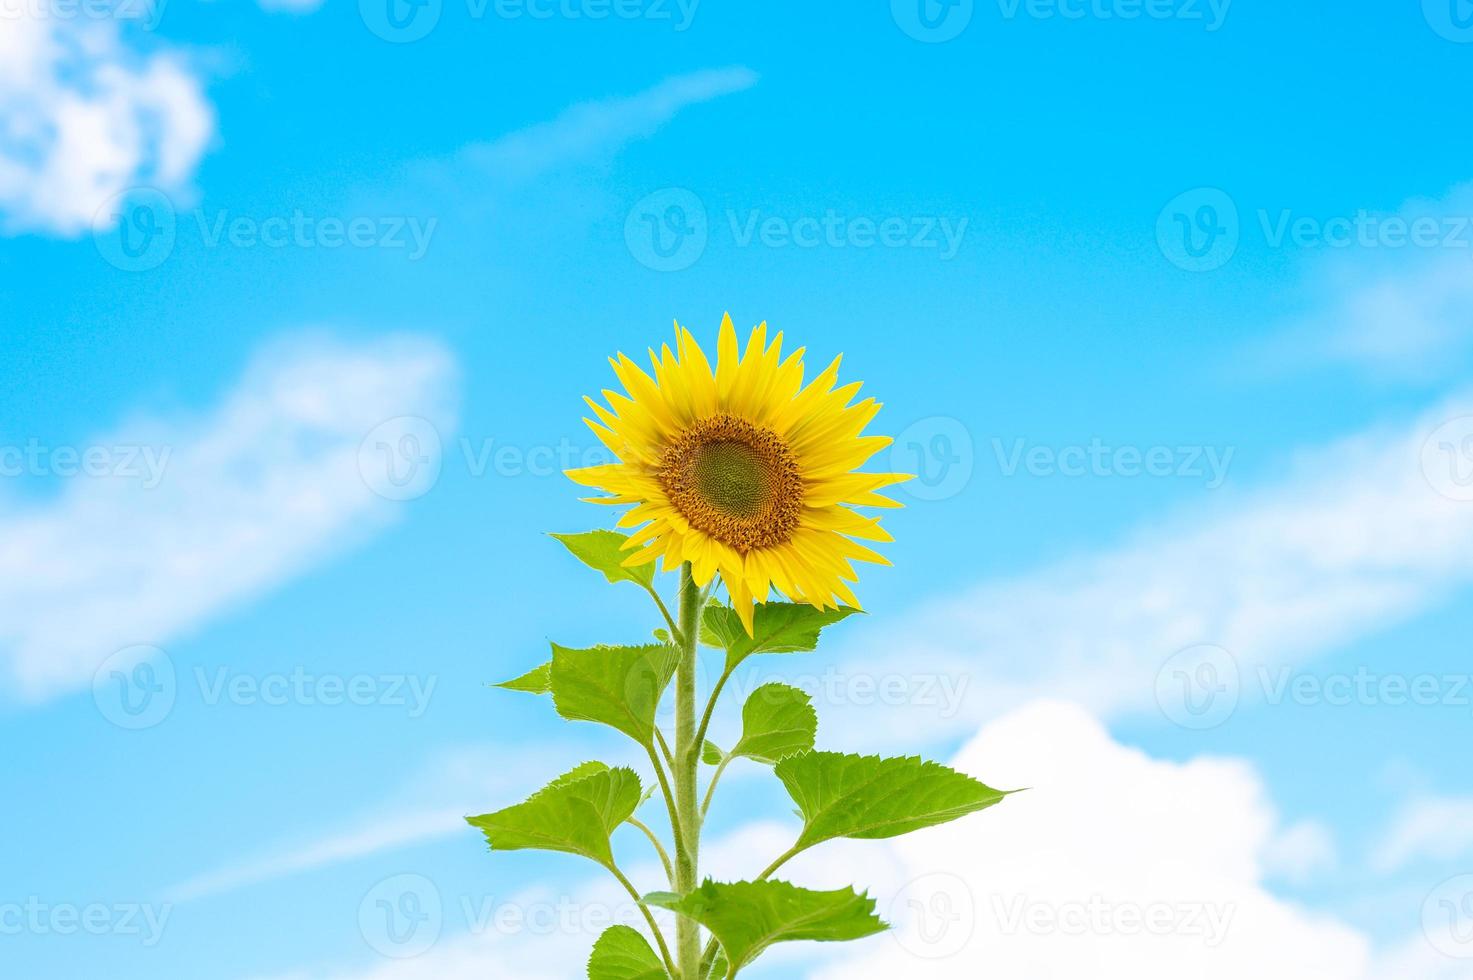 Sunflower on blue sky background with clouds photo